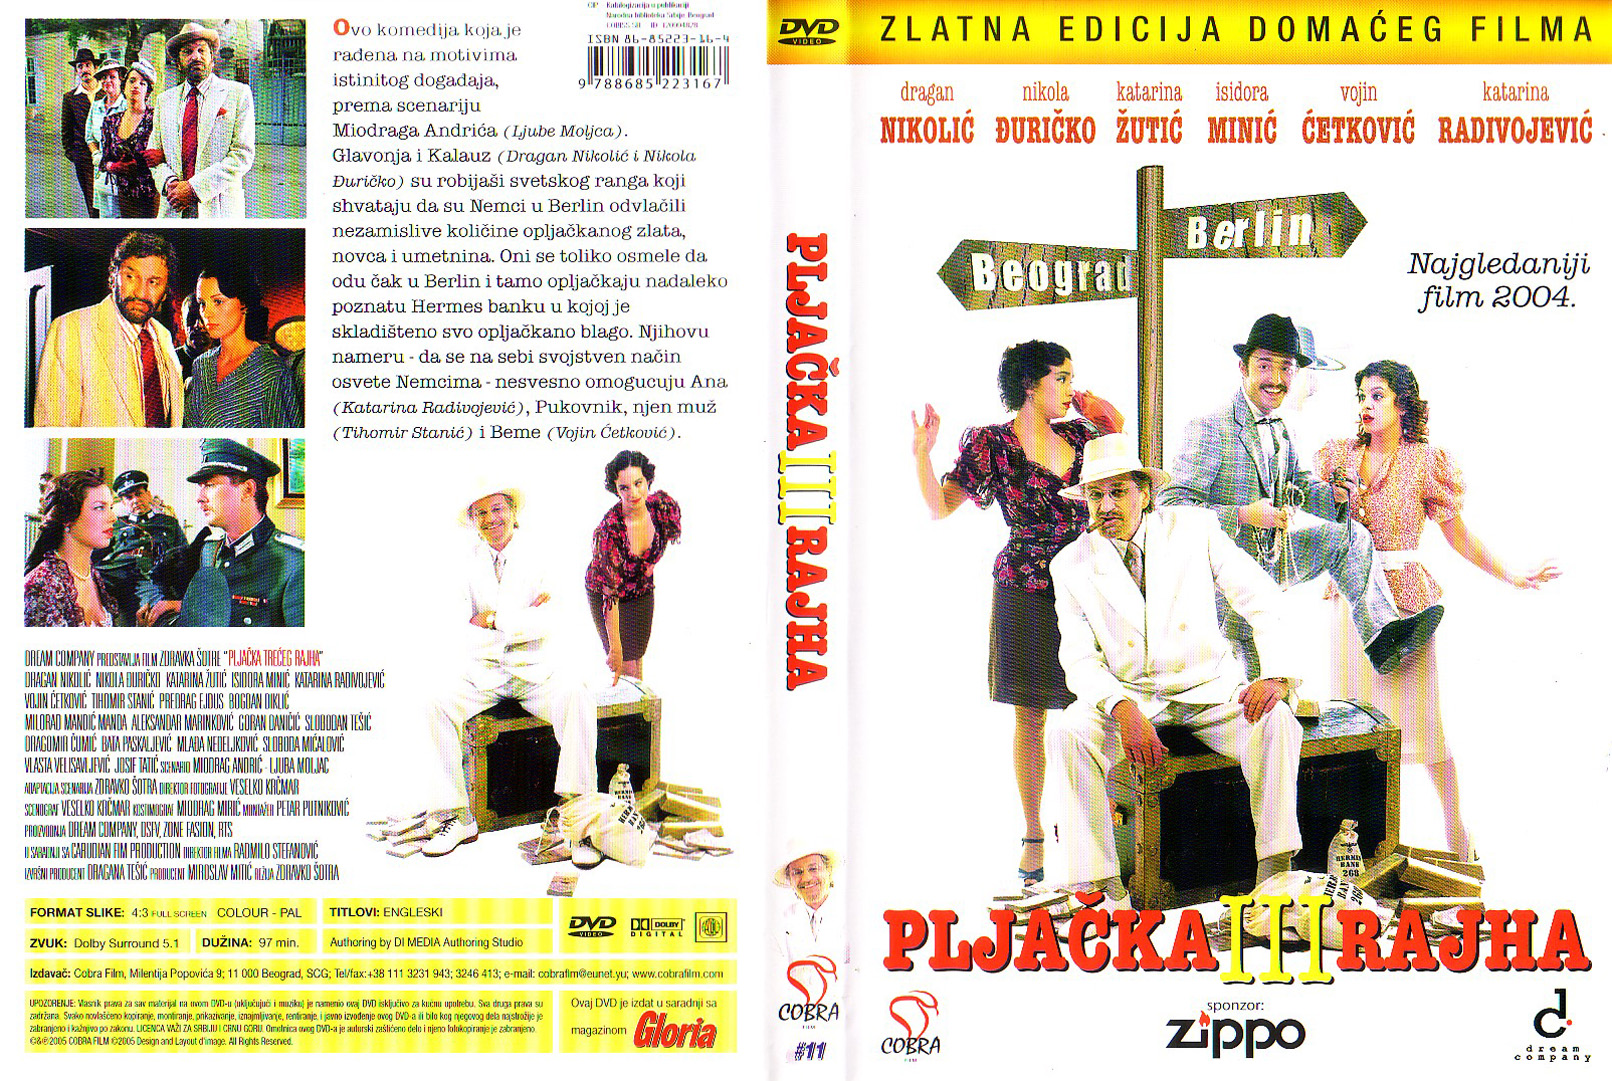 Click to view full size image -  DVD Cover - P - DVD - PLACKA III RAJHA 2 - DVD - PLACKA III RAJHA 2.jpg